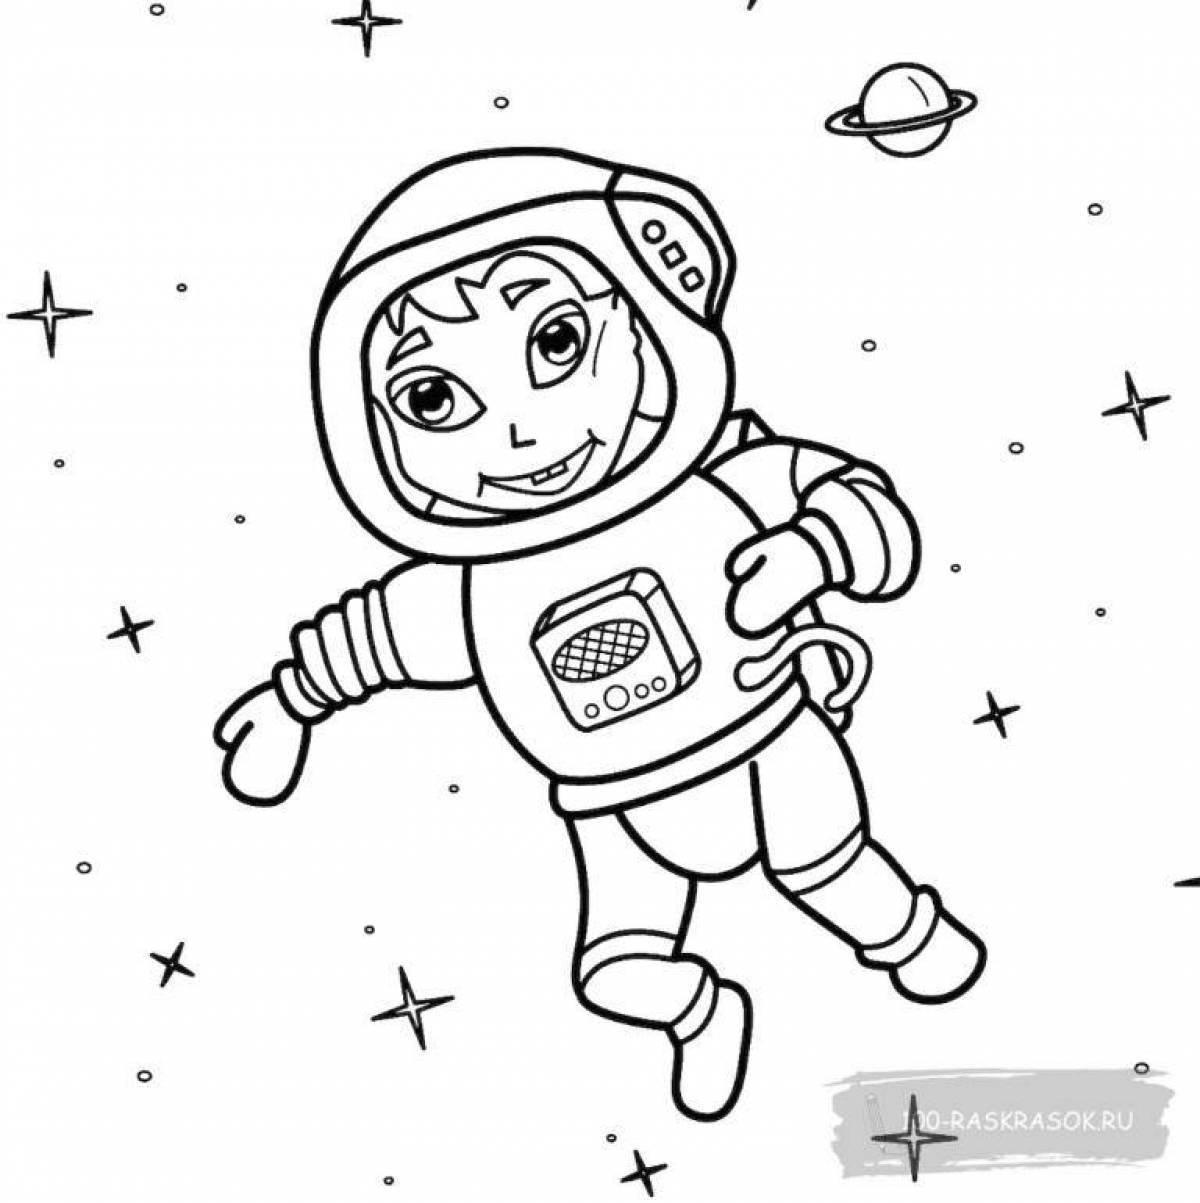 Fun astronaut coloring book for kids